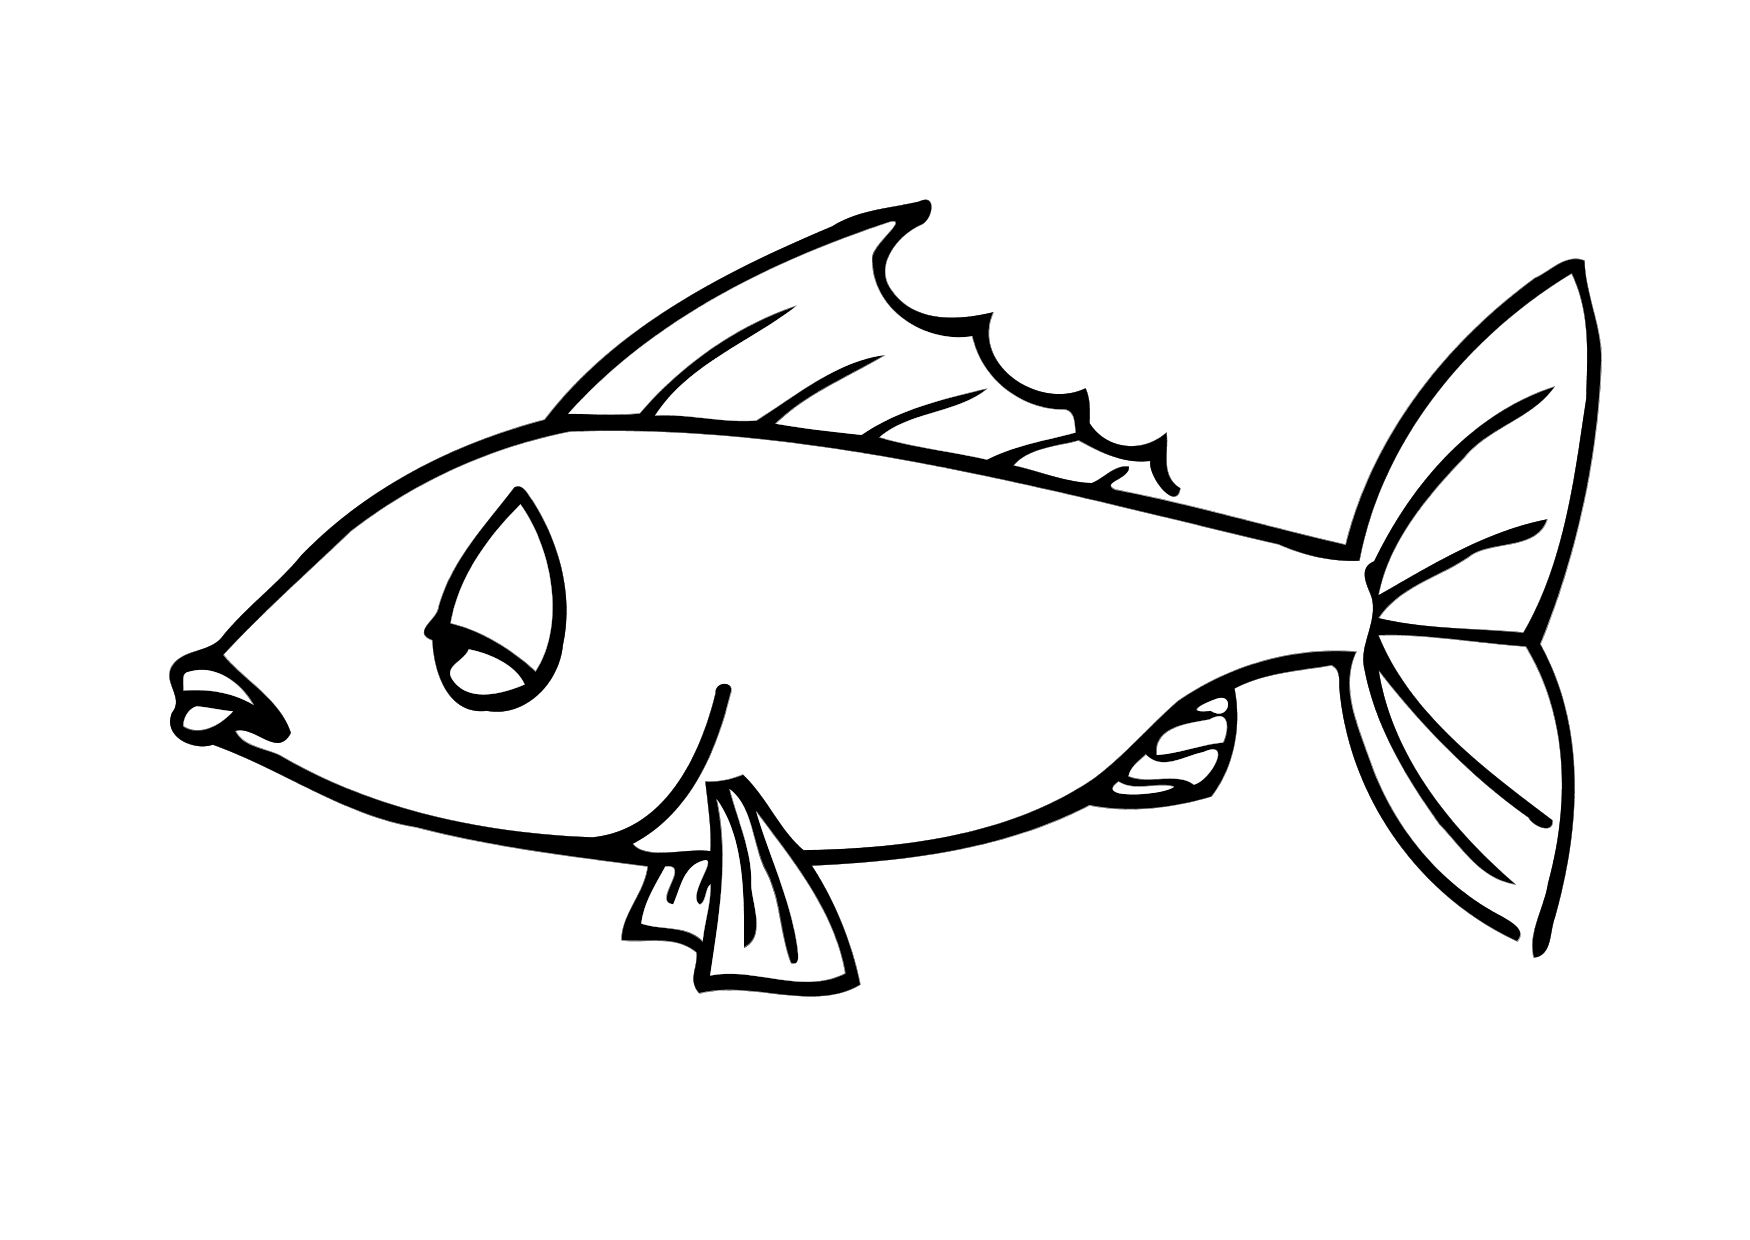 Line Drawing Of A Fish - ClipArt Best